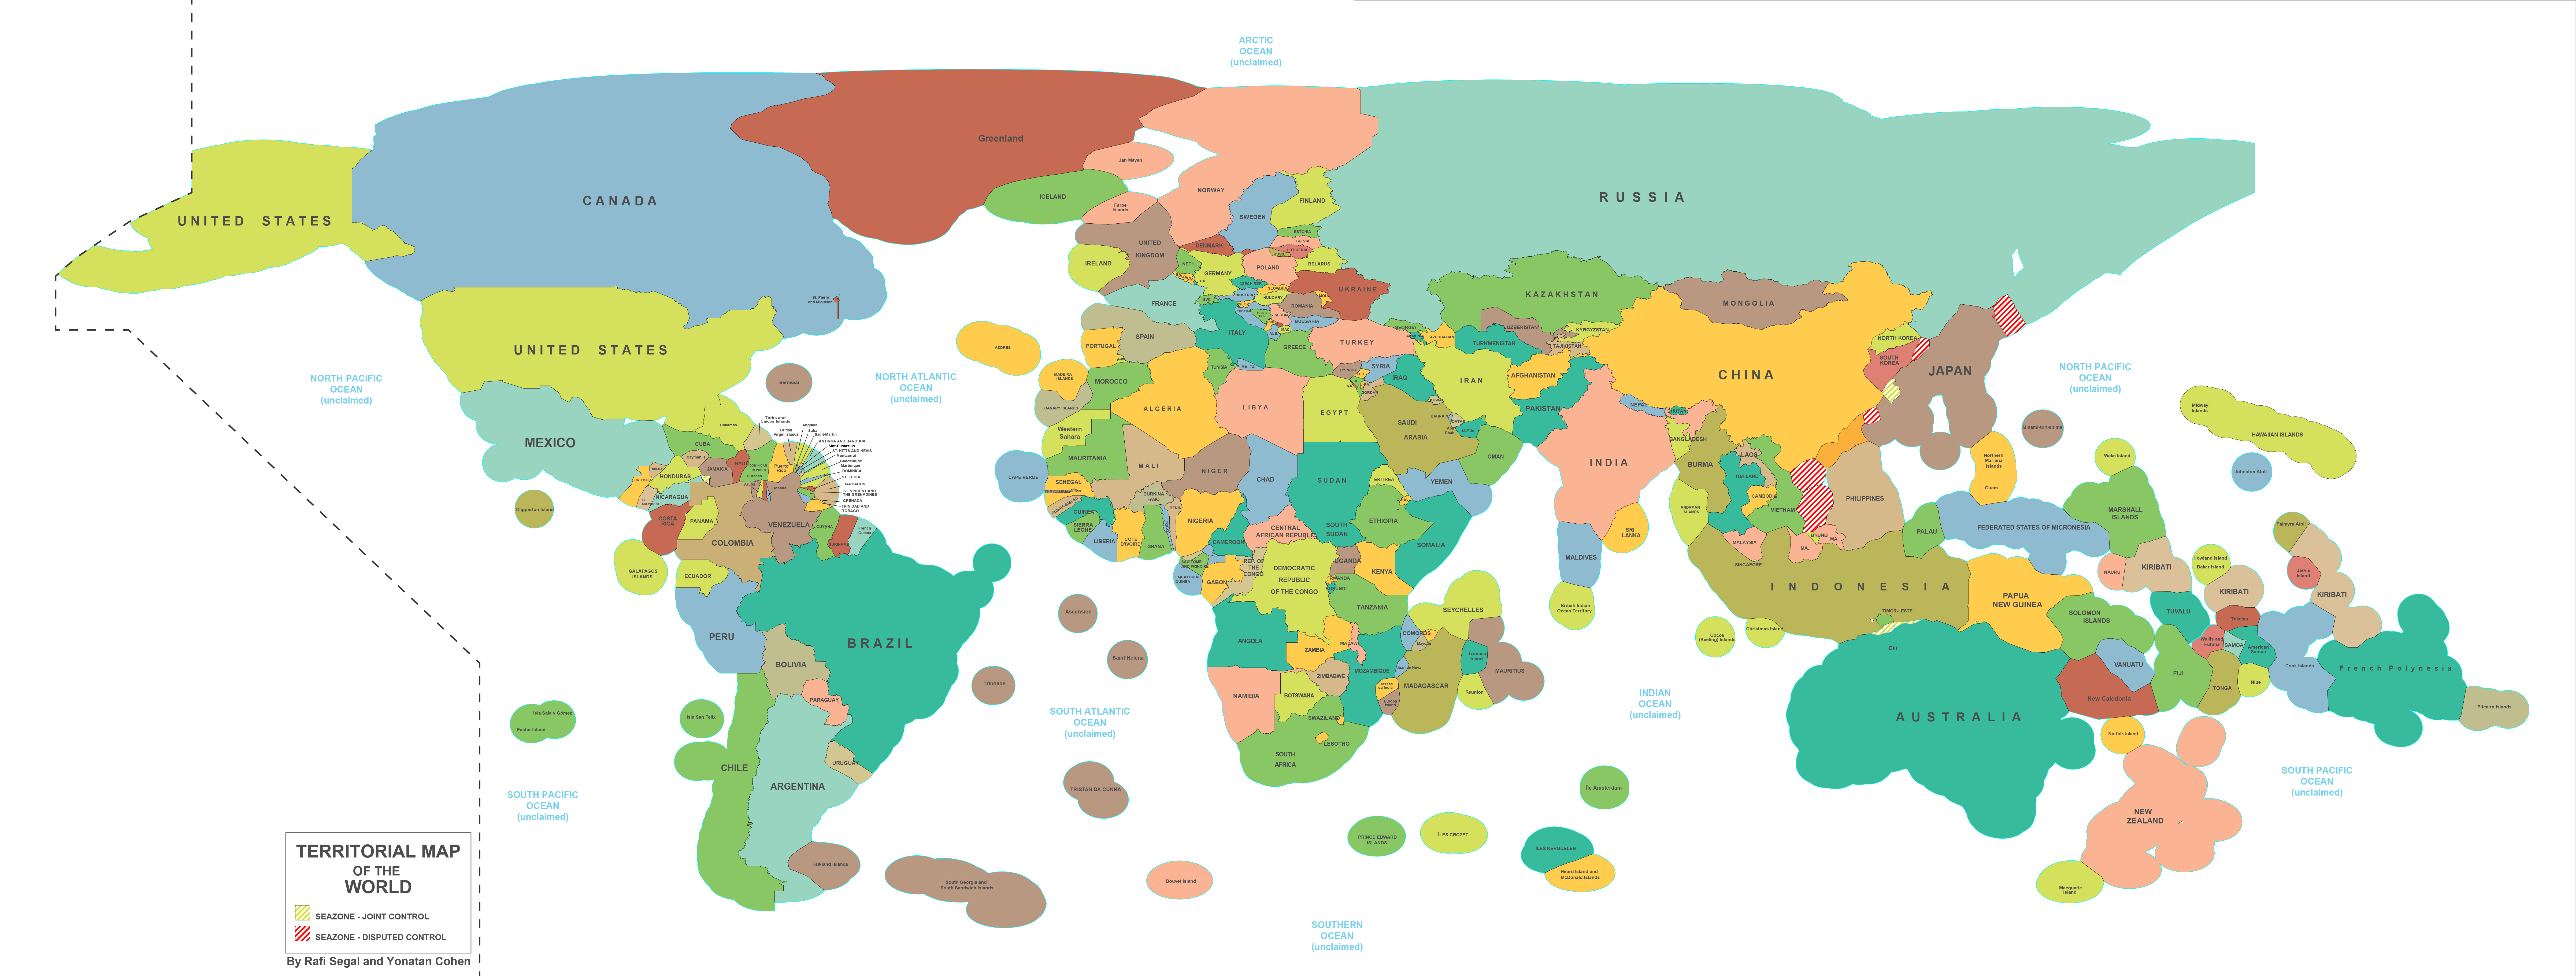 Fascinating World Map Includes Countries Ocean Territory In Their